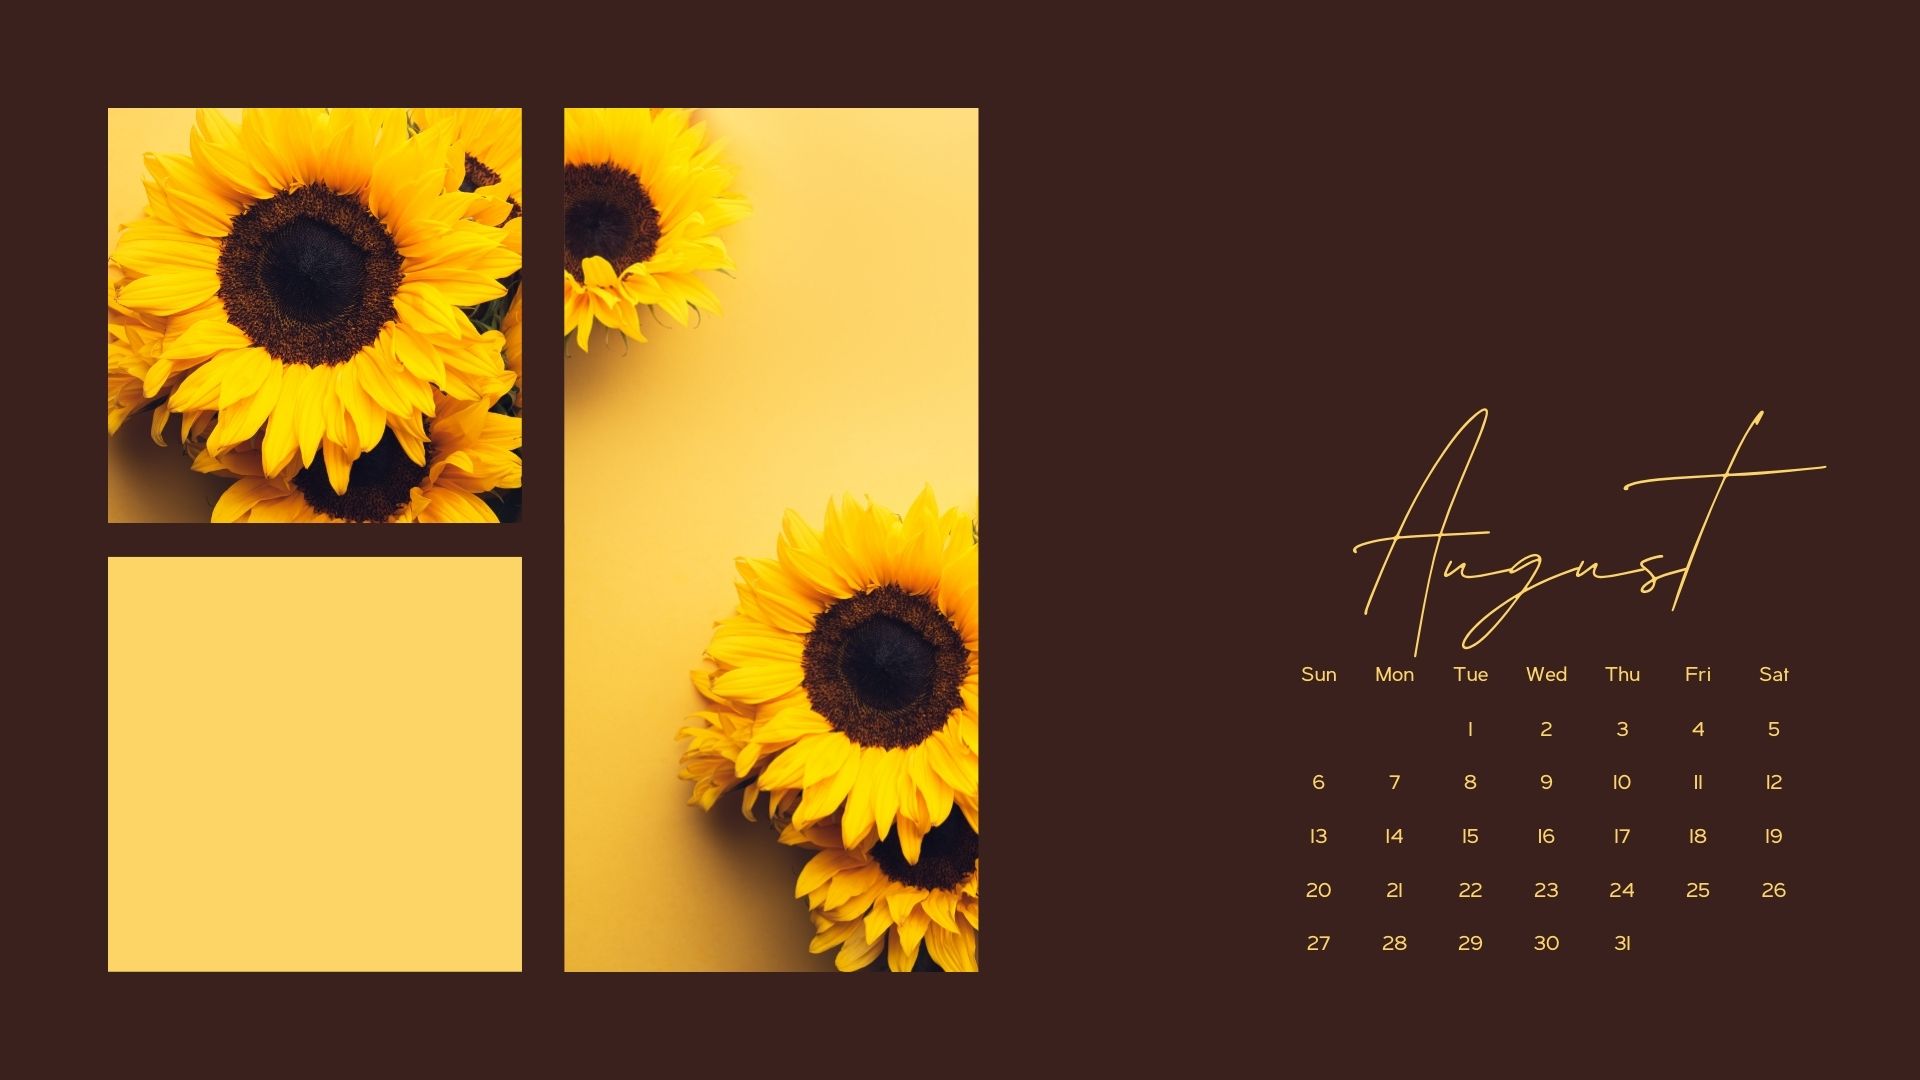 Our August Wallpaper is Here